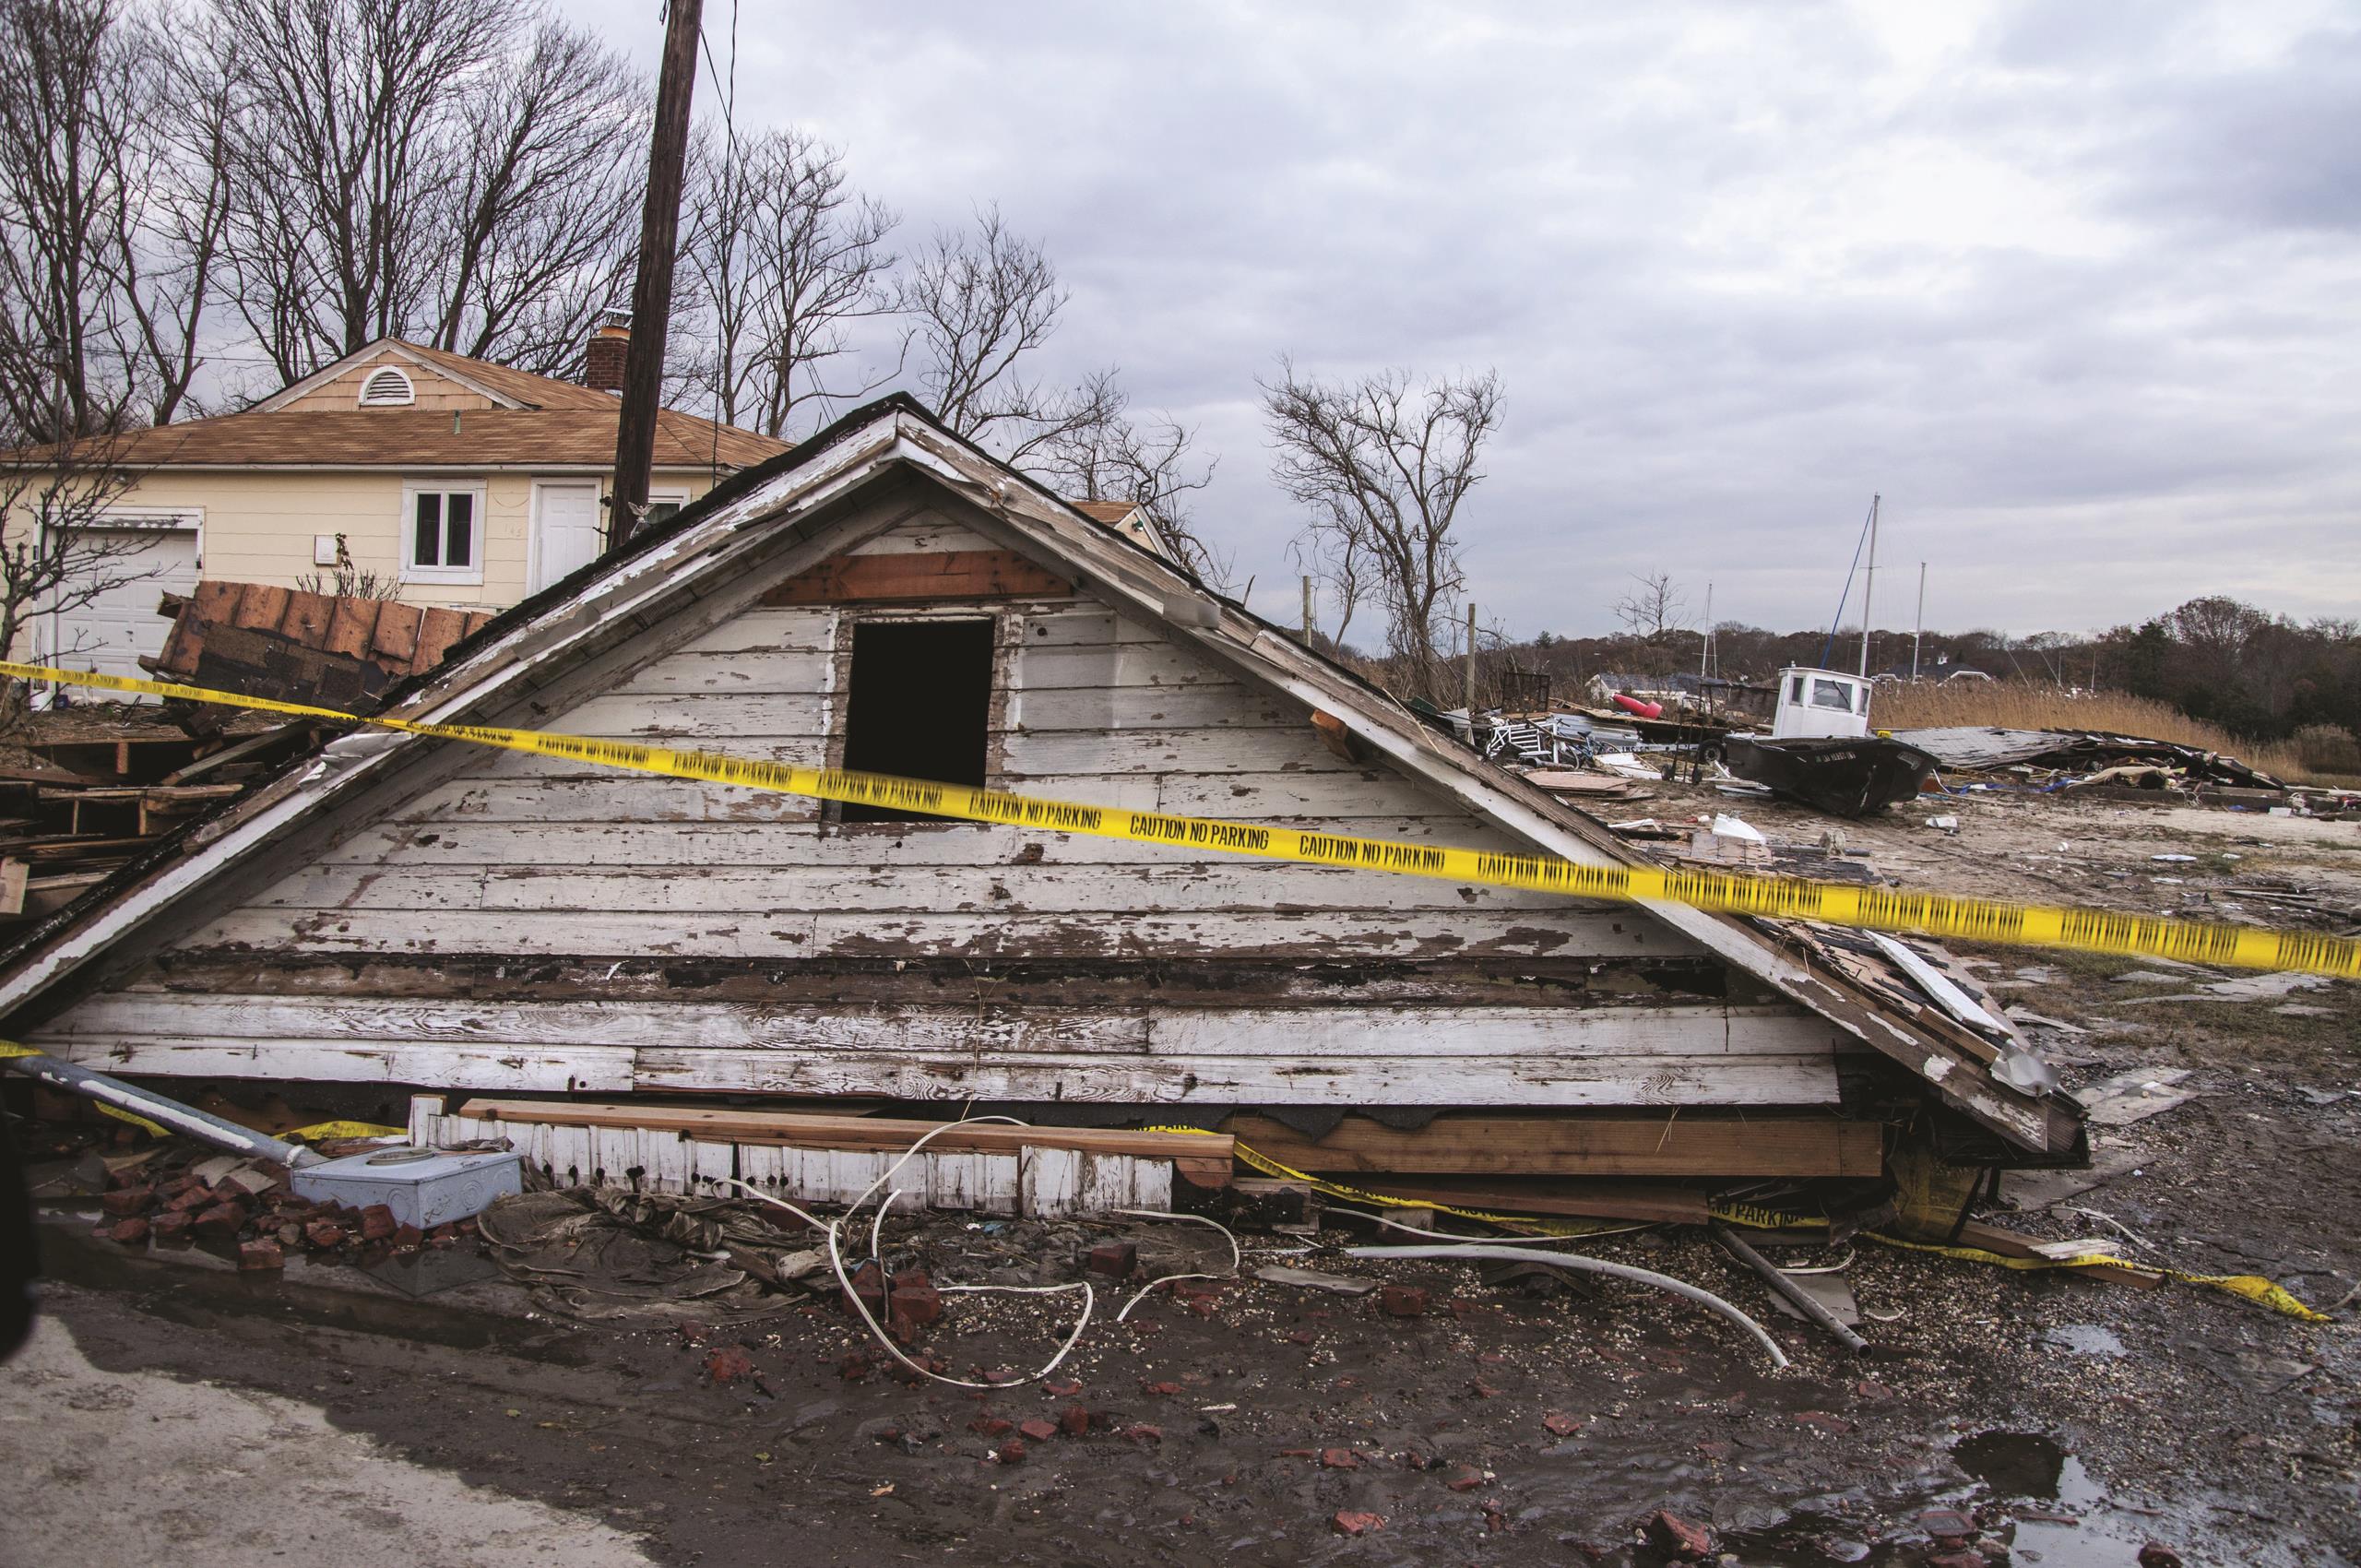 A house's roof that has been ripped off by Hurricane Sandy